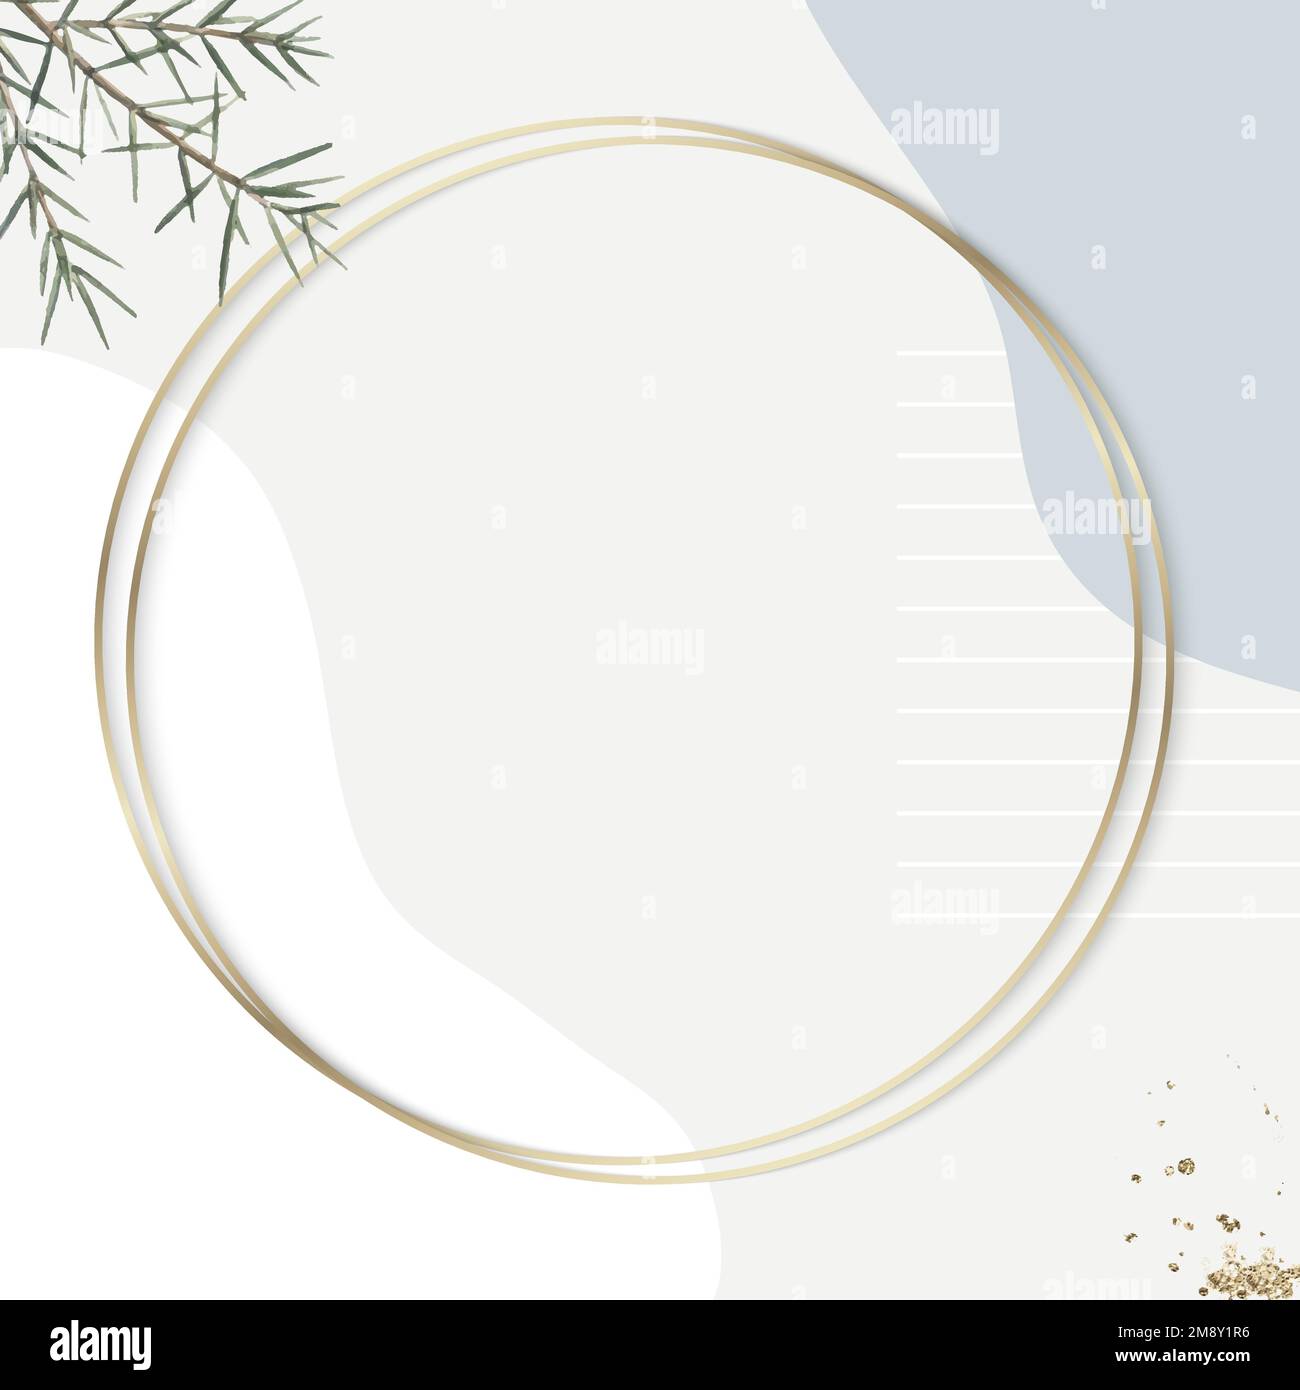 Round gold frame on beige minimal patterned background vector Stock Vector